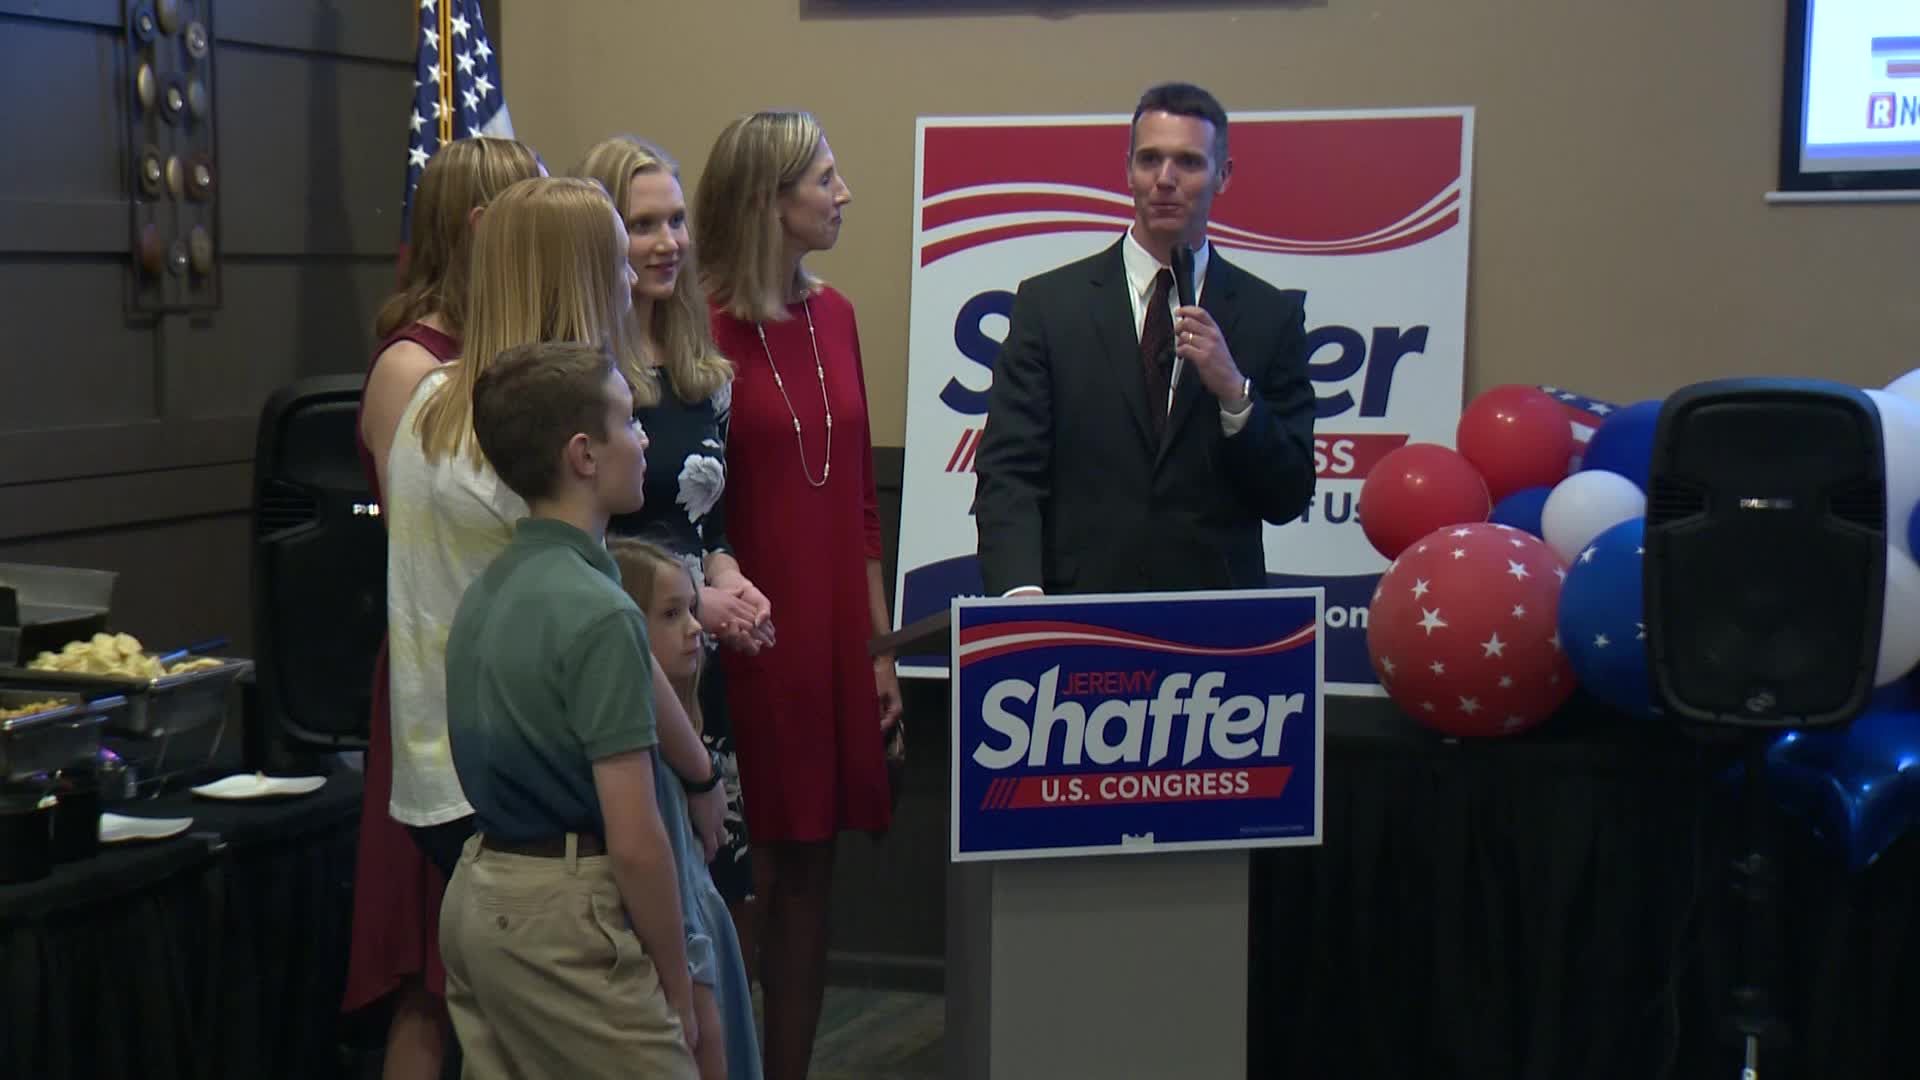 Jeremy Shaffer speaks after his primary win